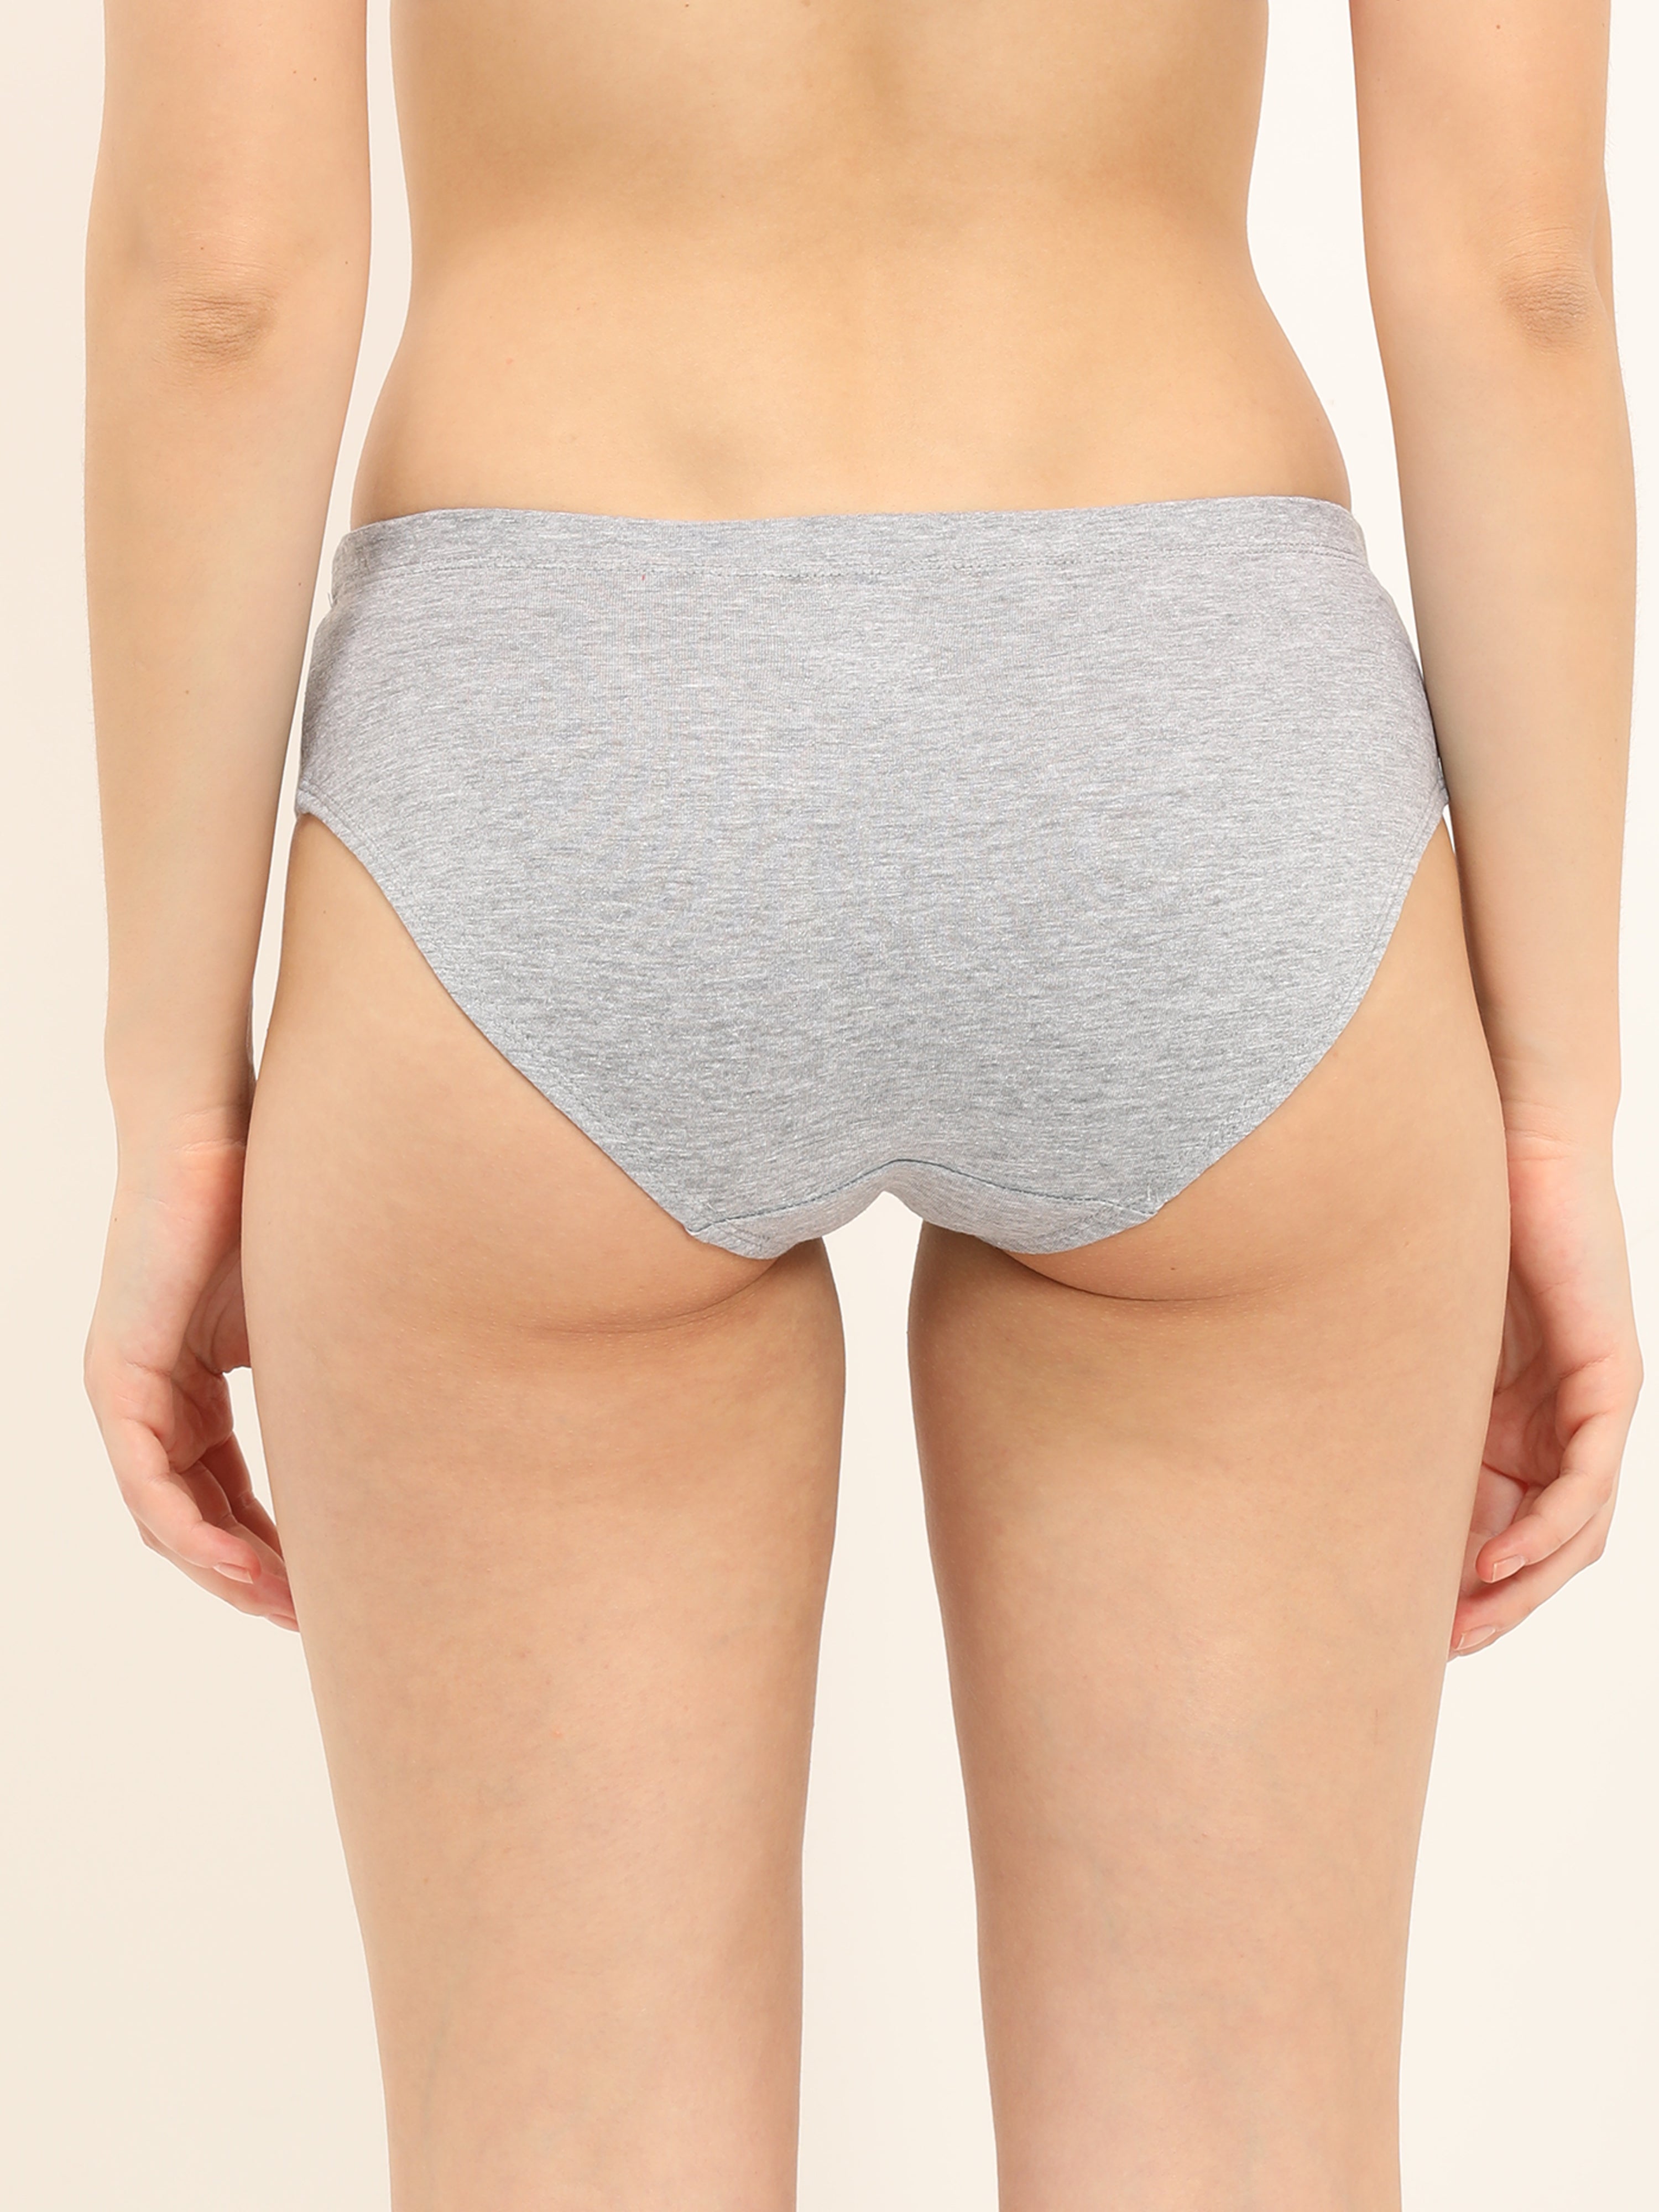 Envie Brief, Low rise panty (Pack of 3) Combo Red, Sapphire, Grey melange